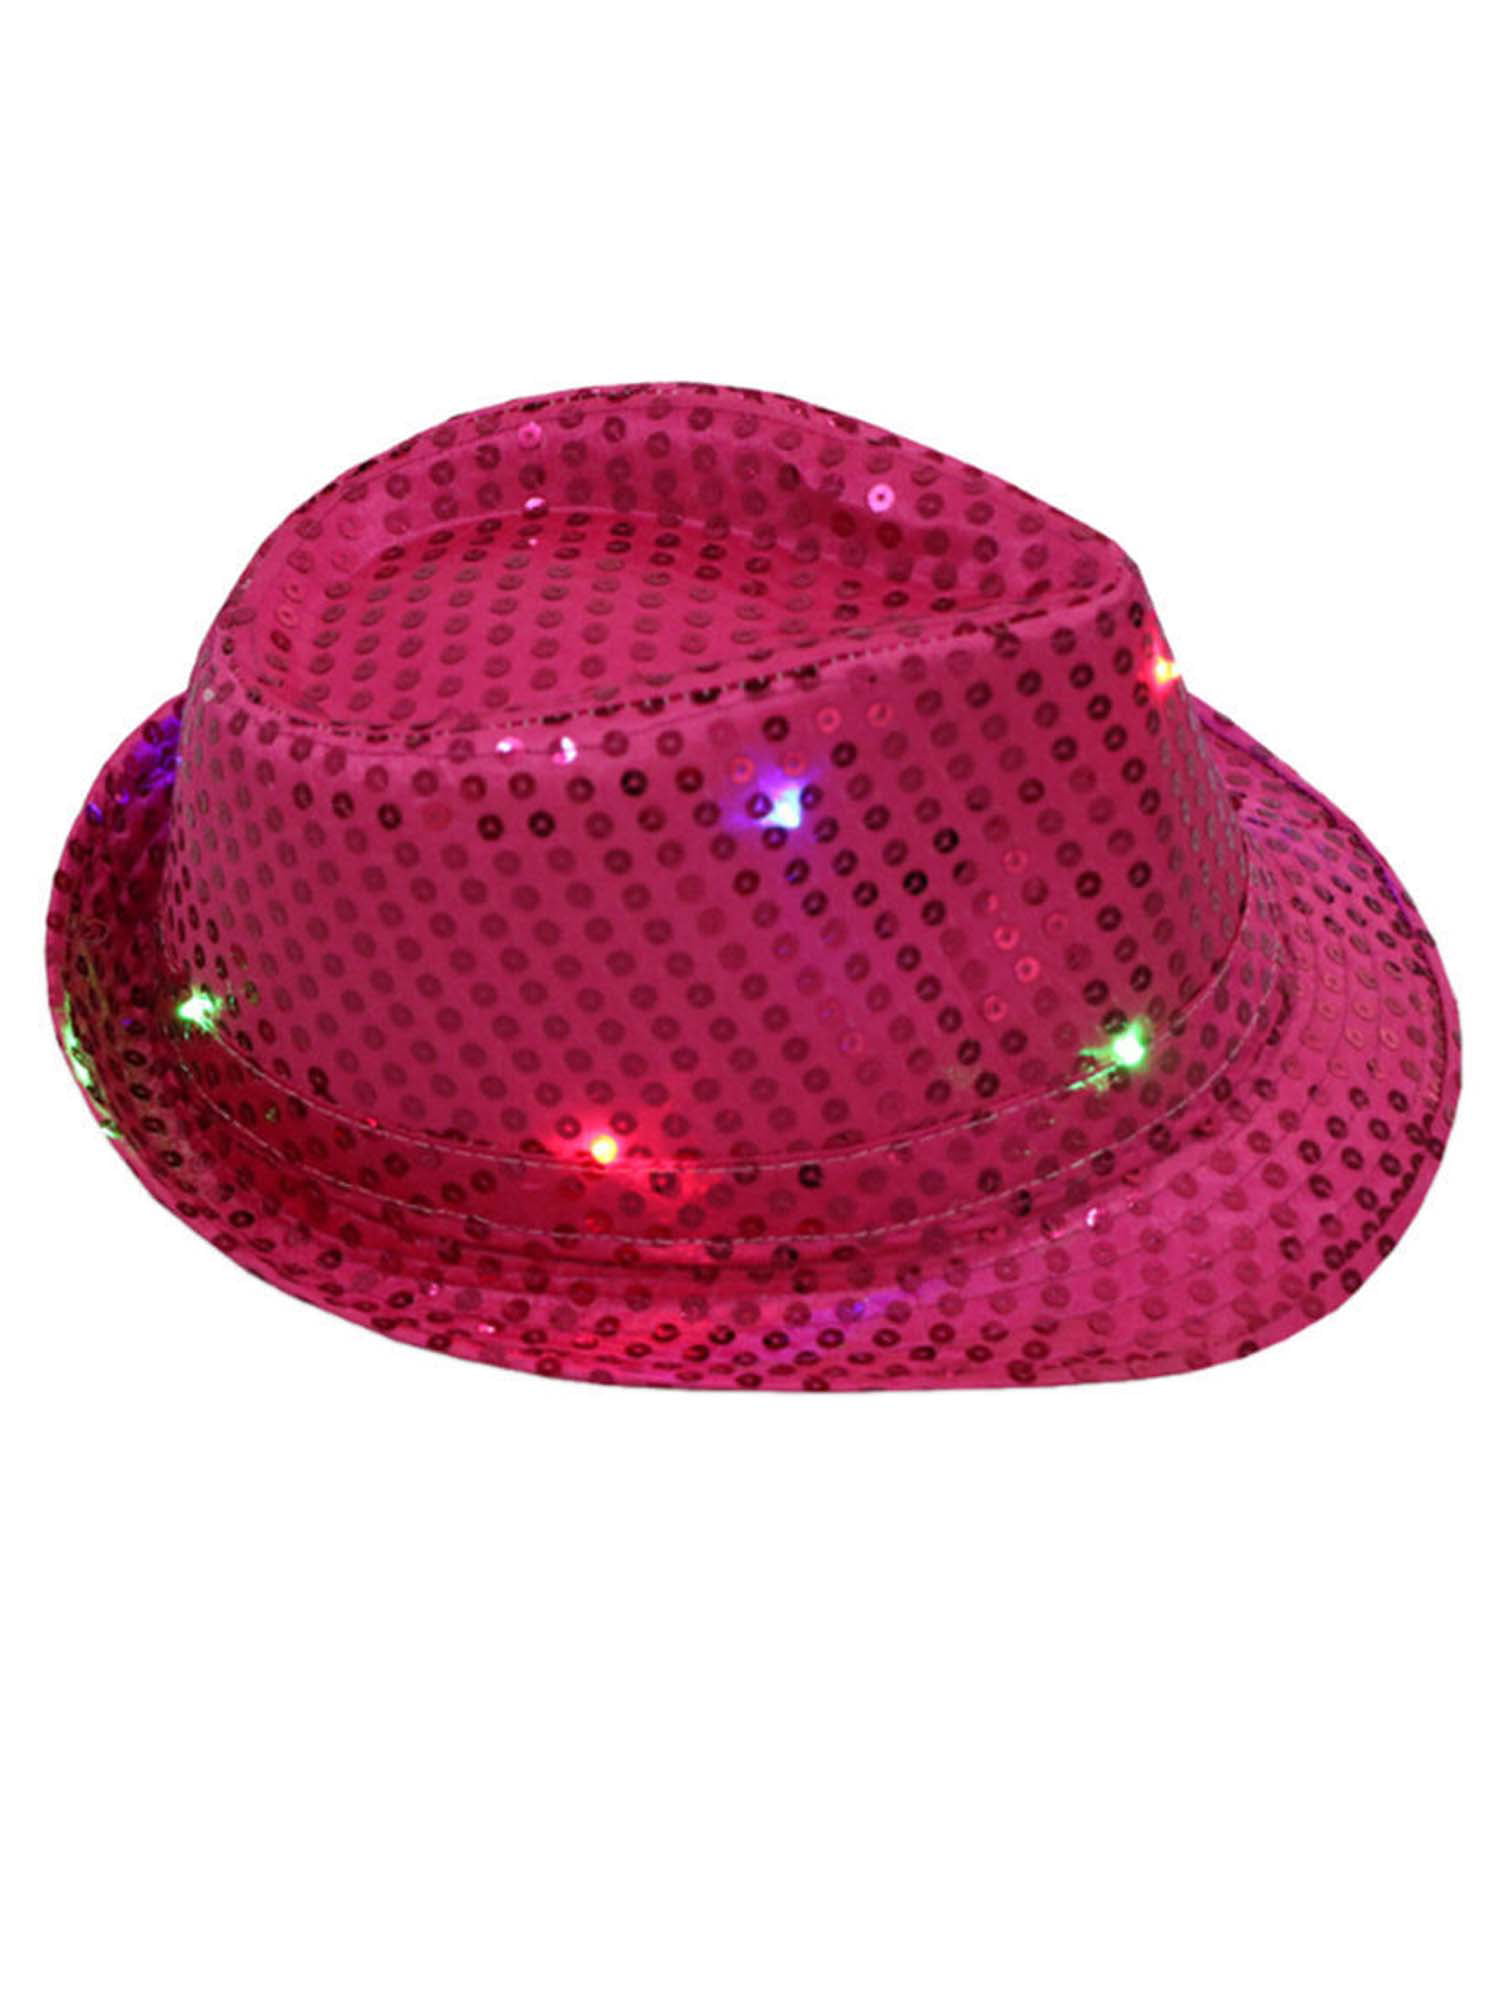 Flashing Light Up DEL Fedora Trilby Sequin Robe Fantaisie Unisexe Danse party hat US 